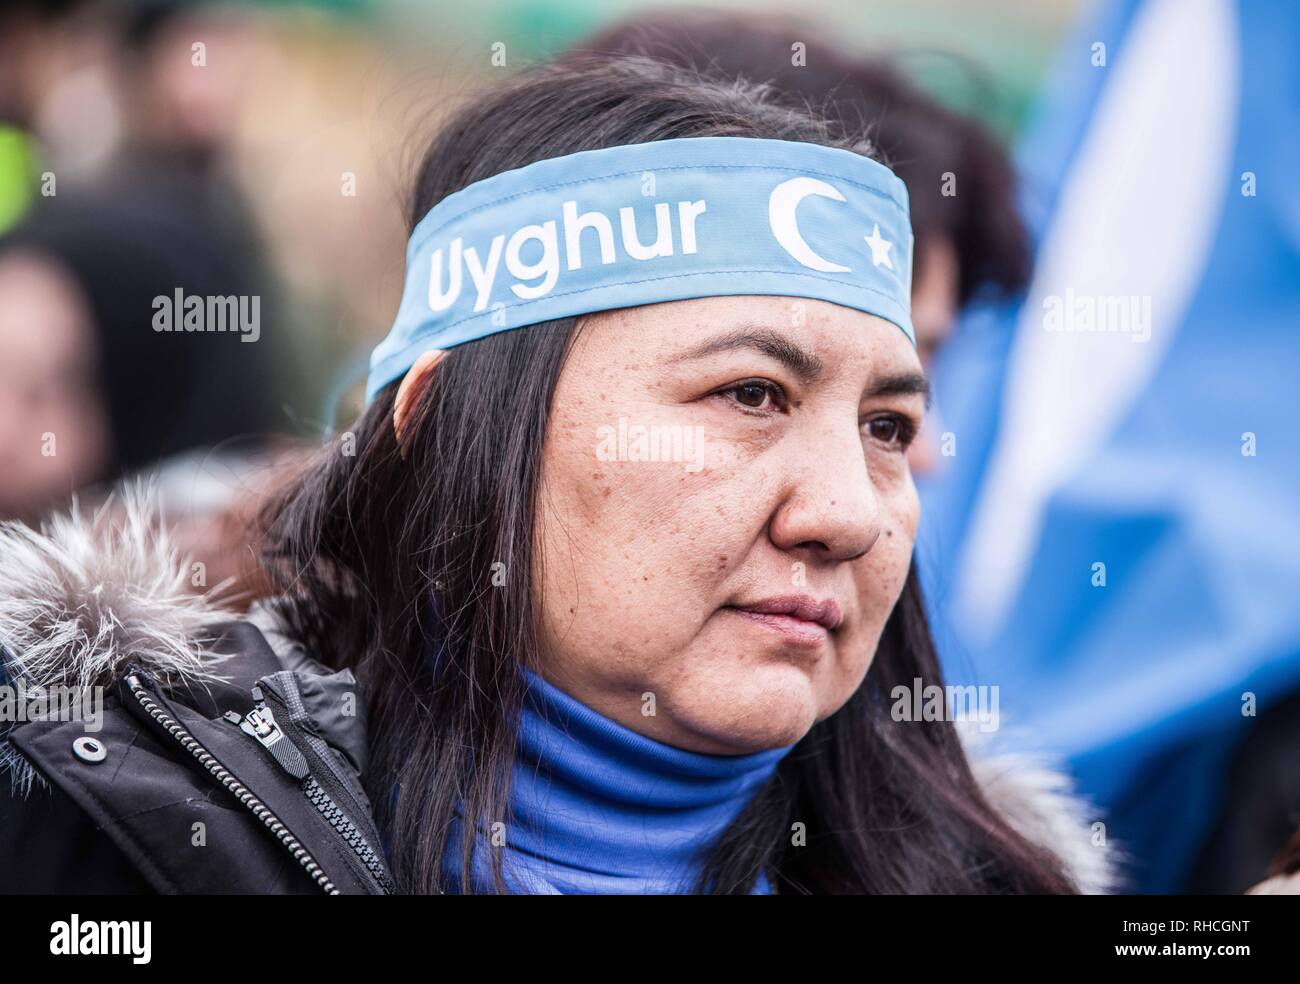 Munich, Bavaria, Germany. 2nd Feb, 2019. A woman at a protest in Germany against the detention of the Uyghurs in China wears a headband with the colors and flag of East Turkestan- the Xinjiang Autonomous Region in China. to protest against the so-called 'Muslim Crackdown'' by the Chinese Communist Party in the Xinjiang Autonomous Region of China. The region is contains roughly 26 million people, 11 million of whom are the ethnically Turkic Uyghurs who still call the region East Turkistan . The CCP has p Credit: ZU Credit: ZUMA Press, Inc./Alamy Live News Stock Photo